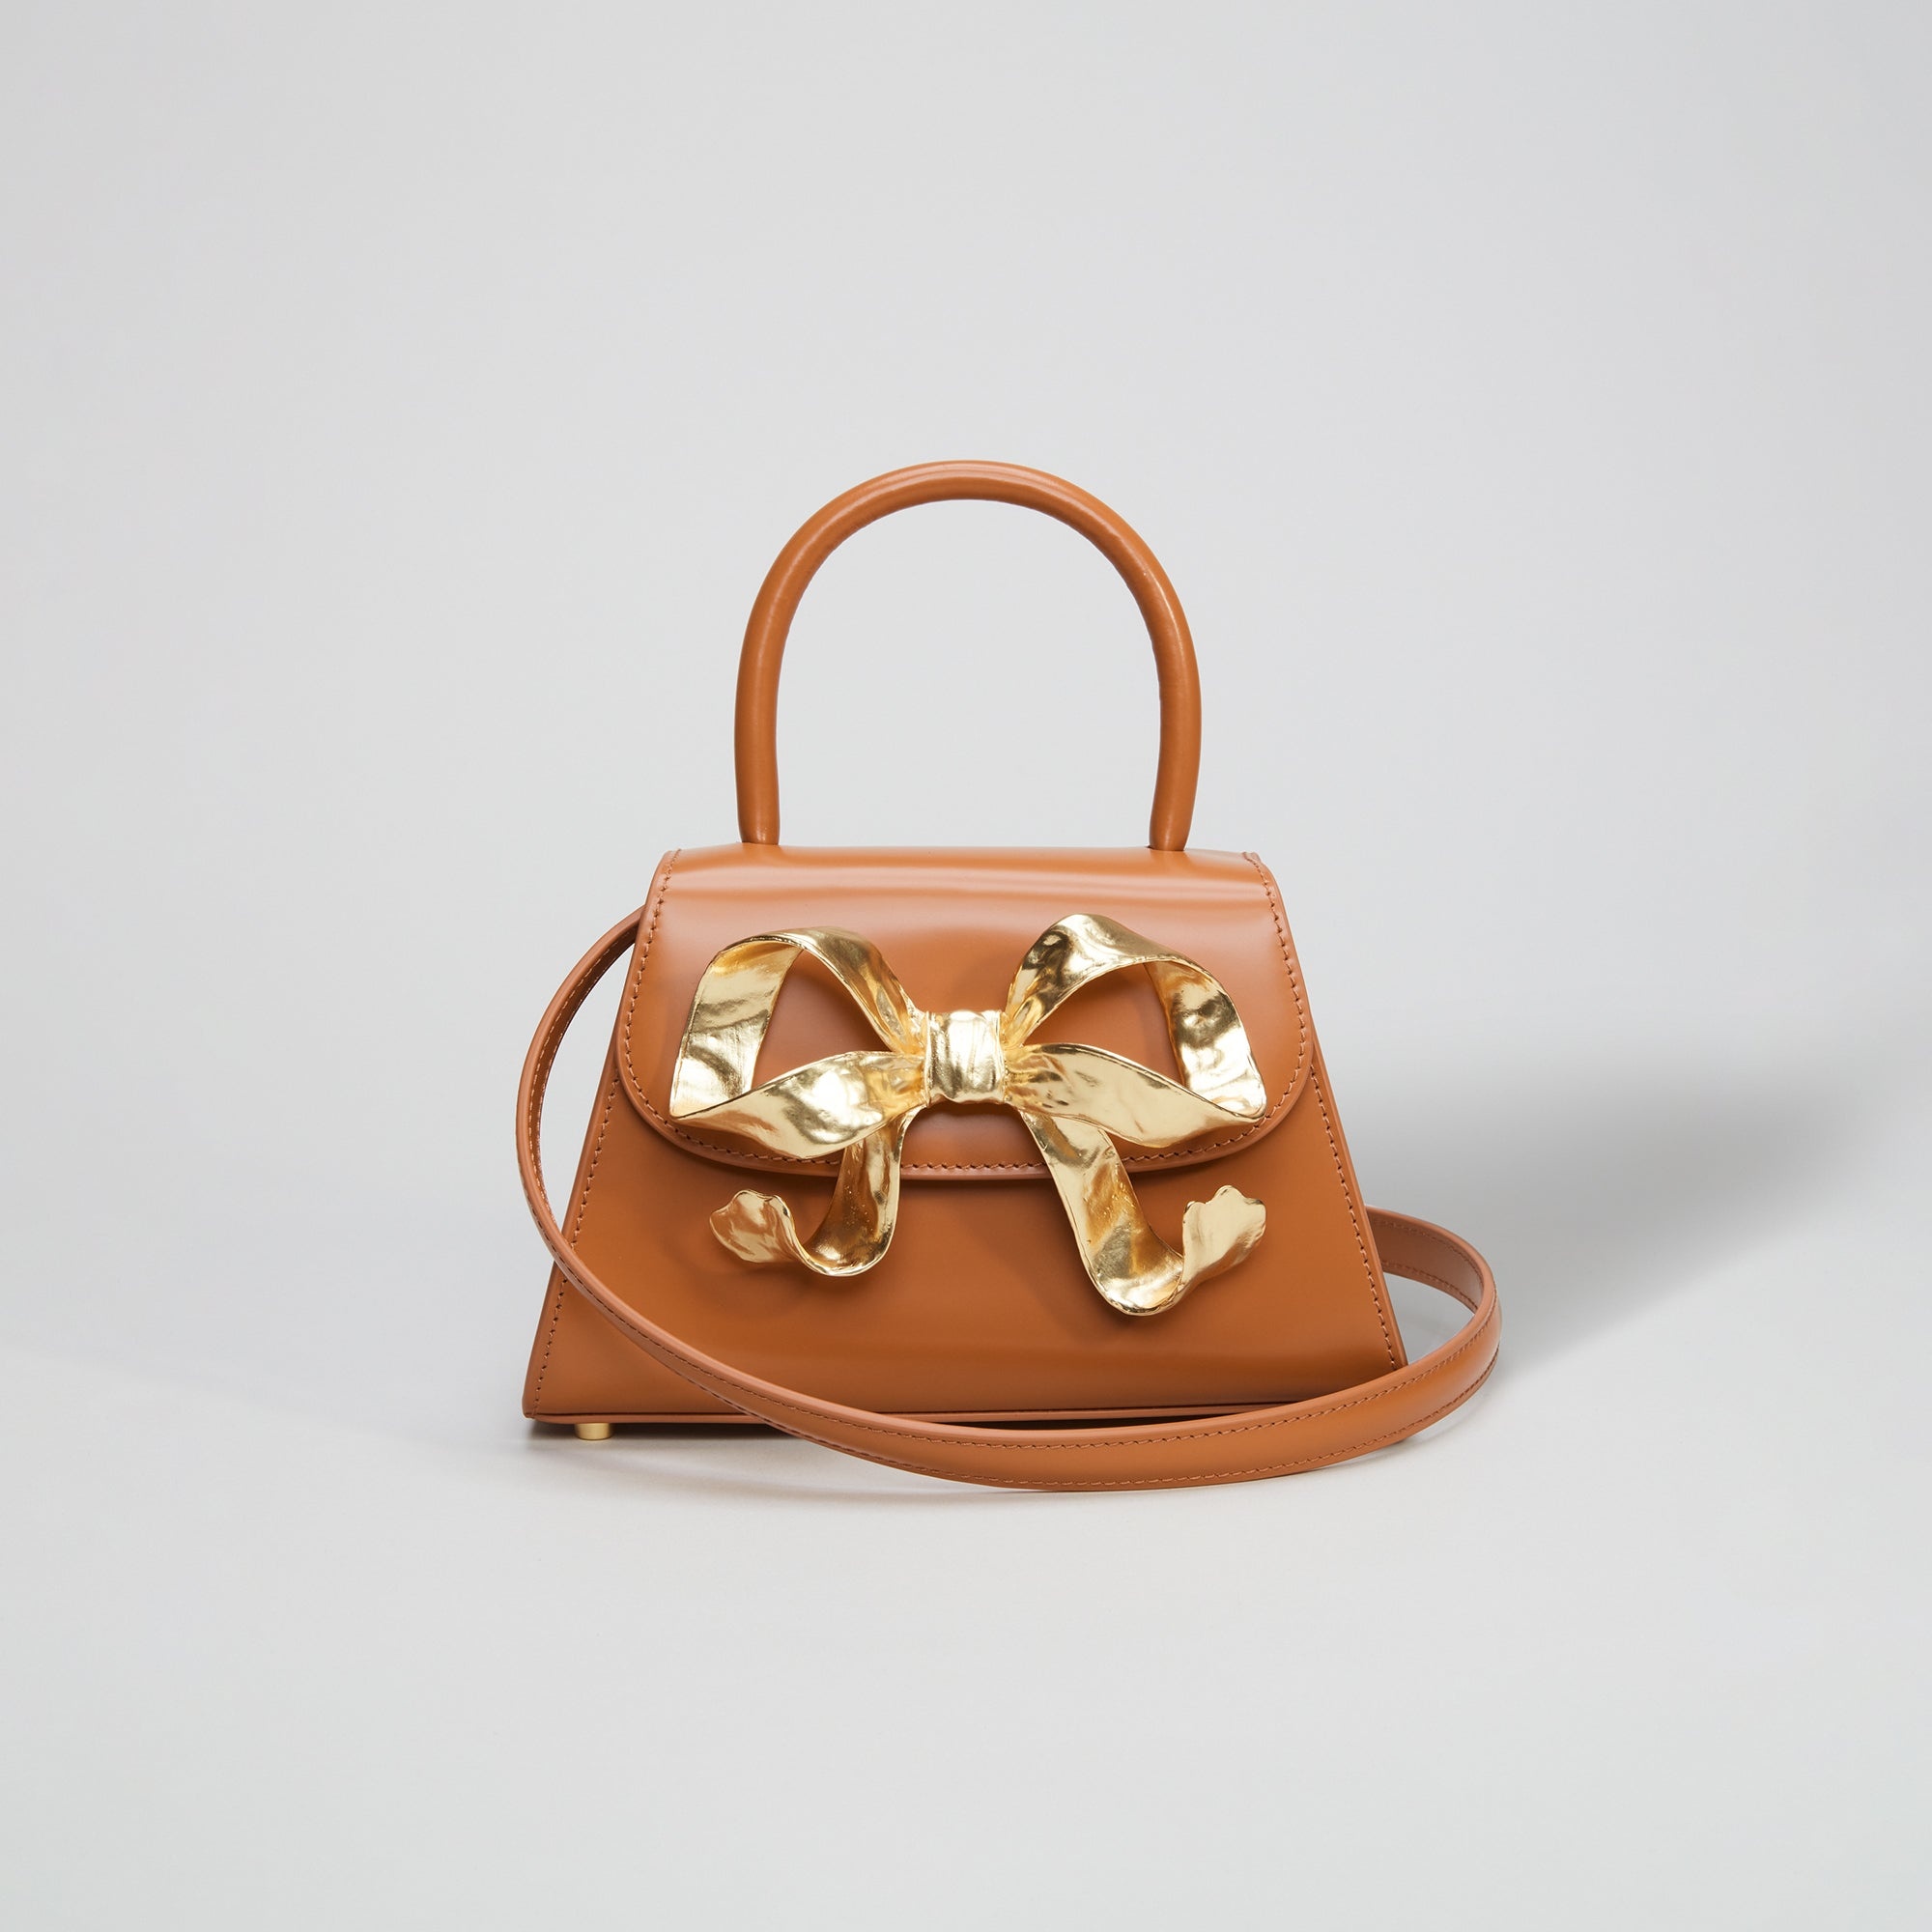 The Bow Mini in Tan with Gold Hardware - 4